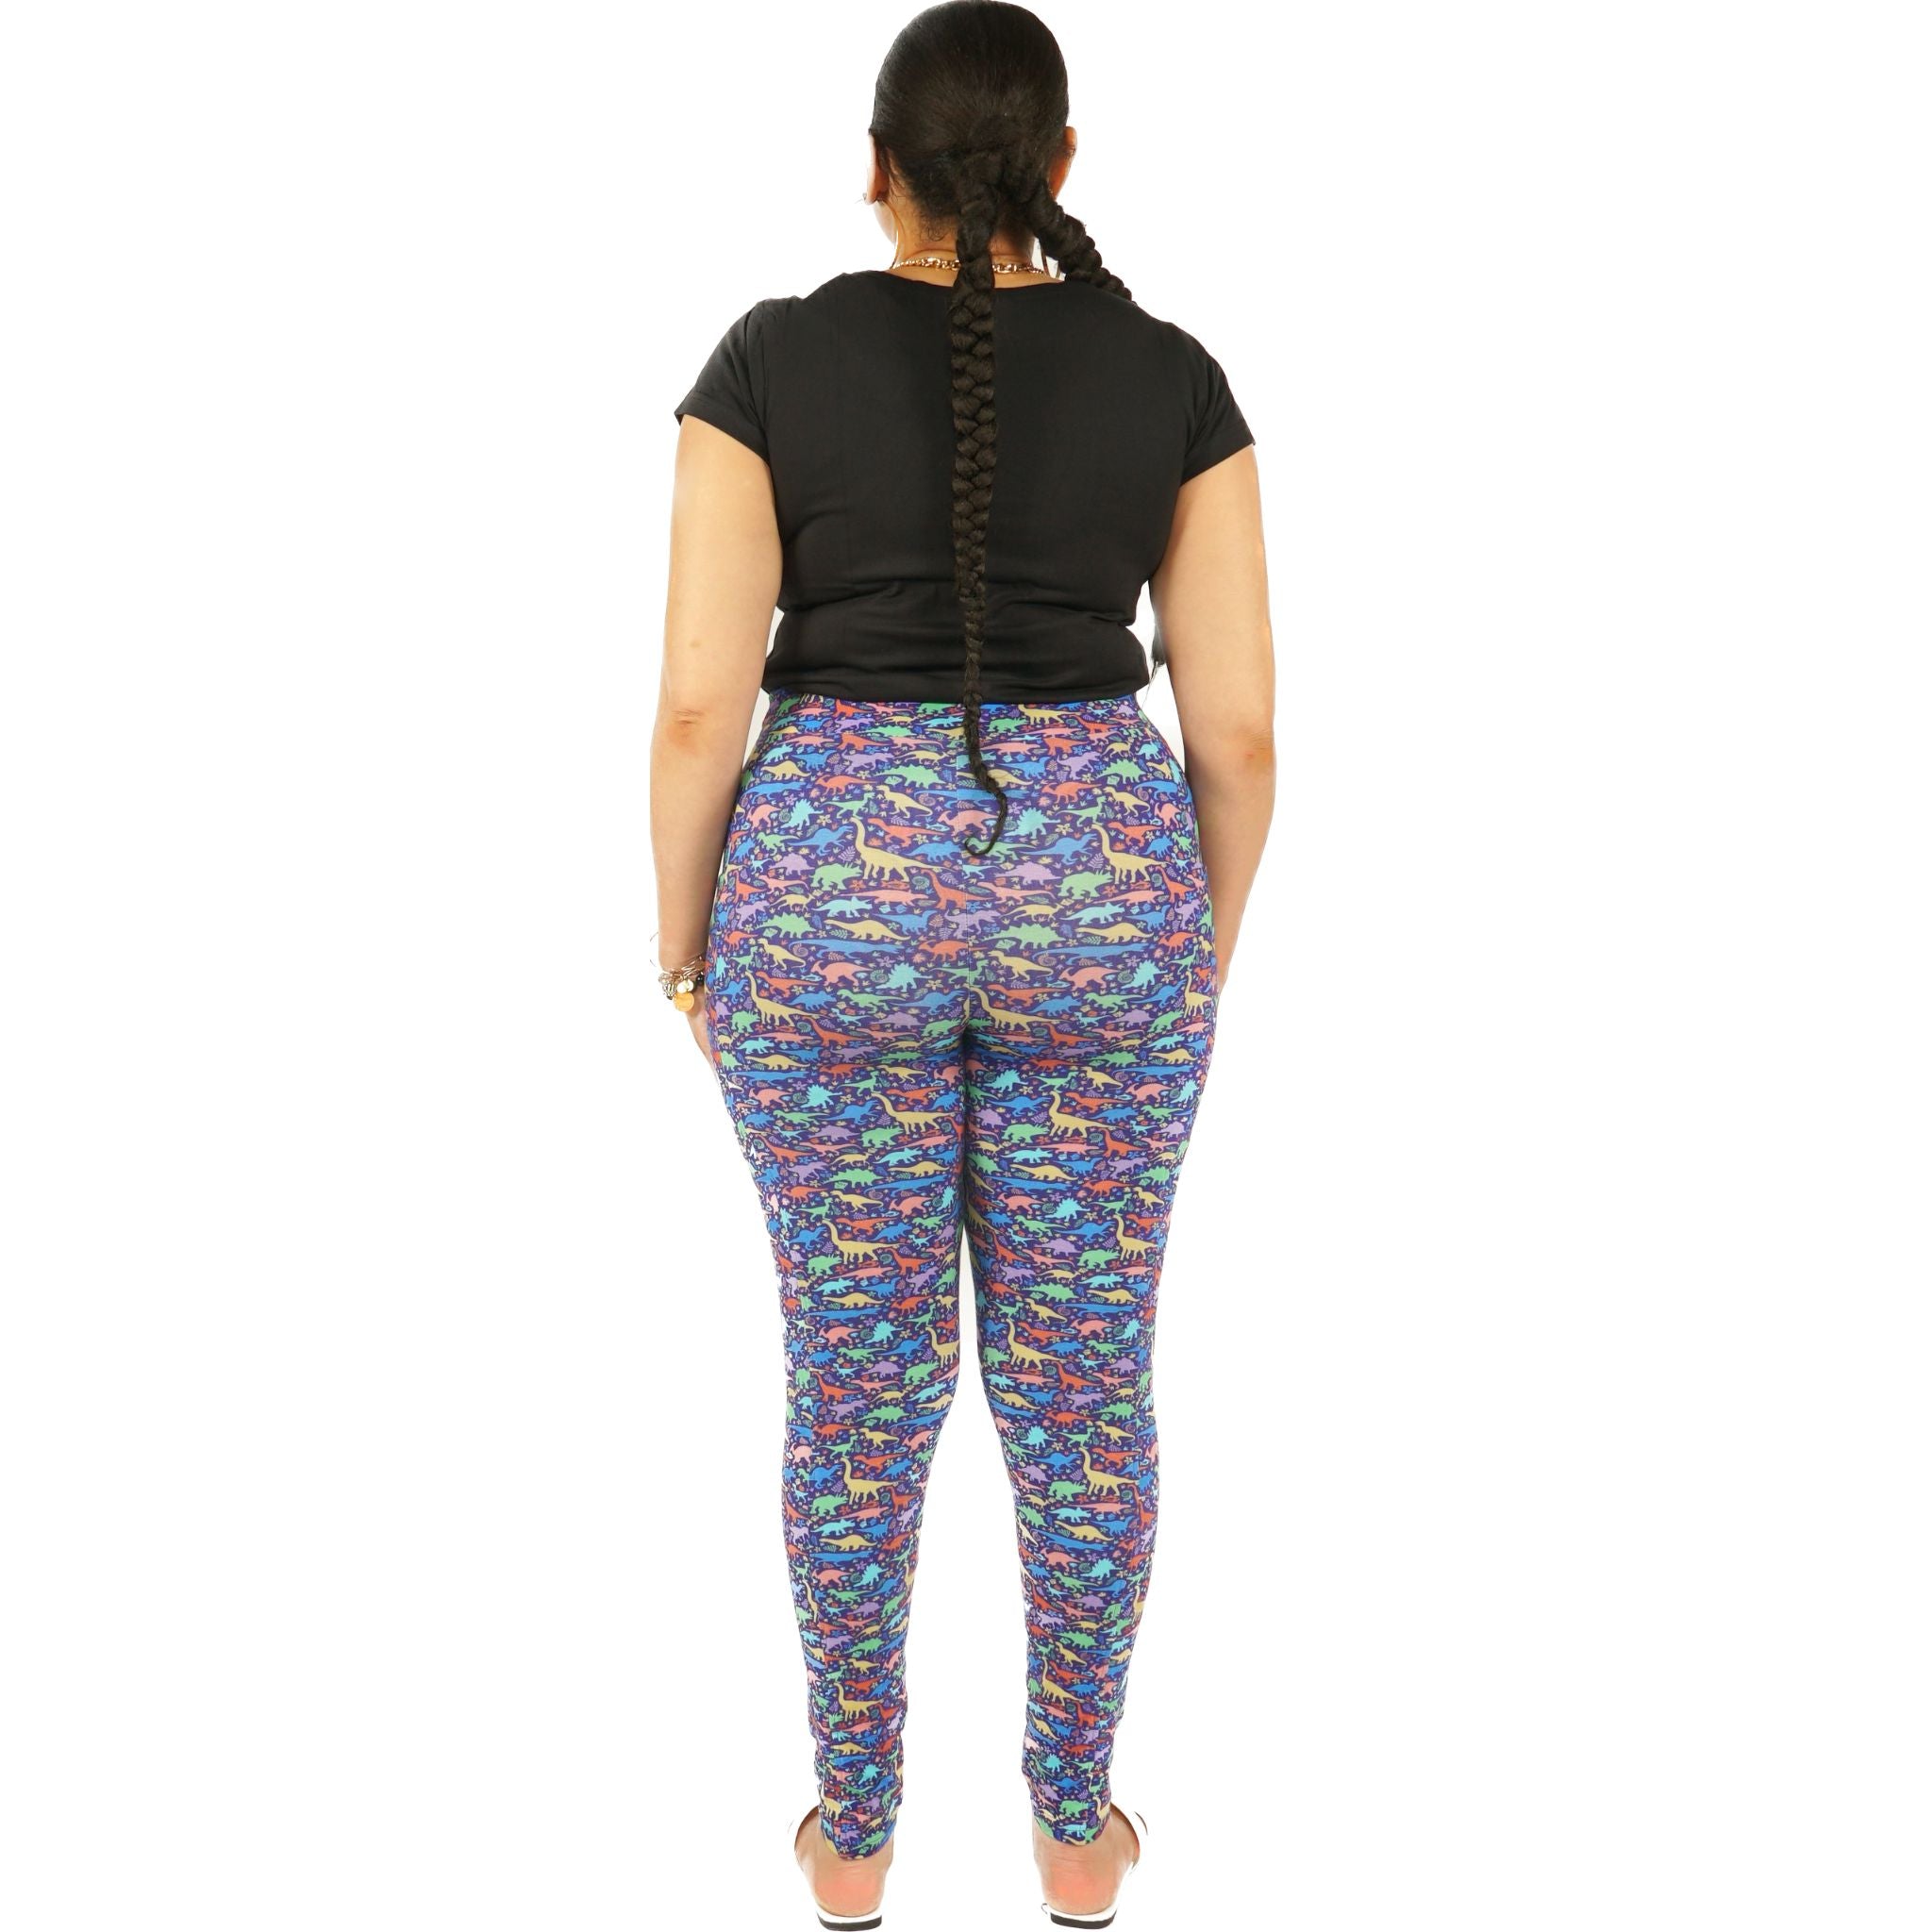 Dinosaurs & Fossils Adults Leggings with Pockets